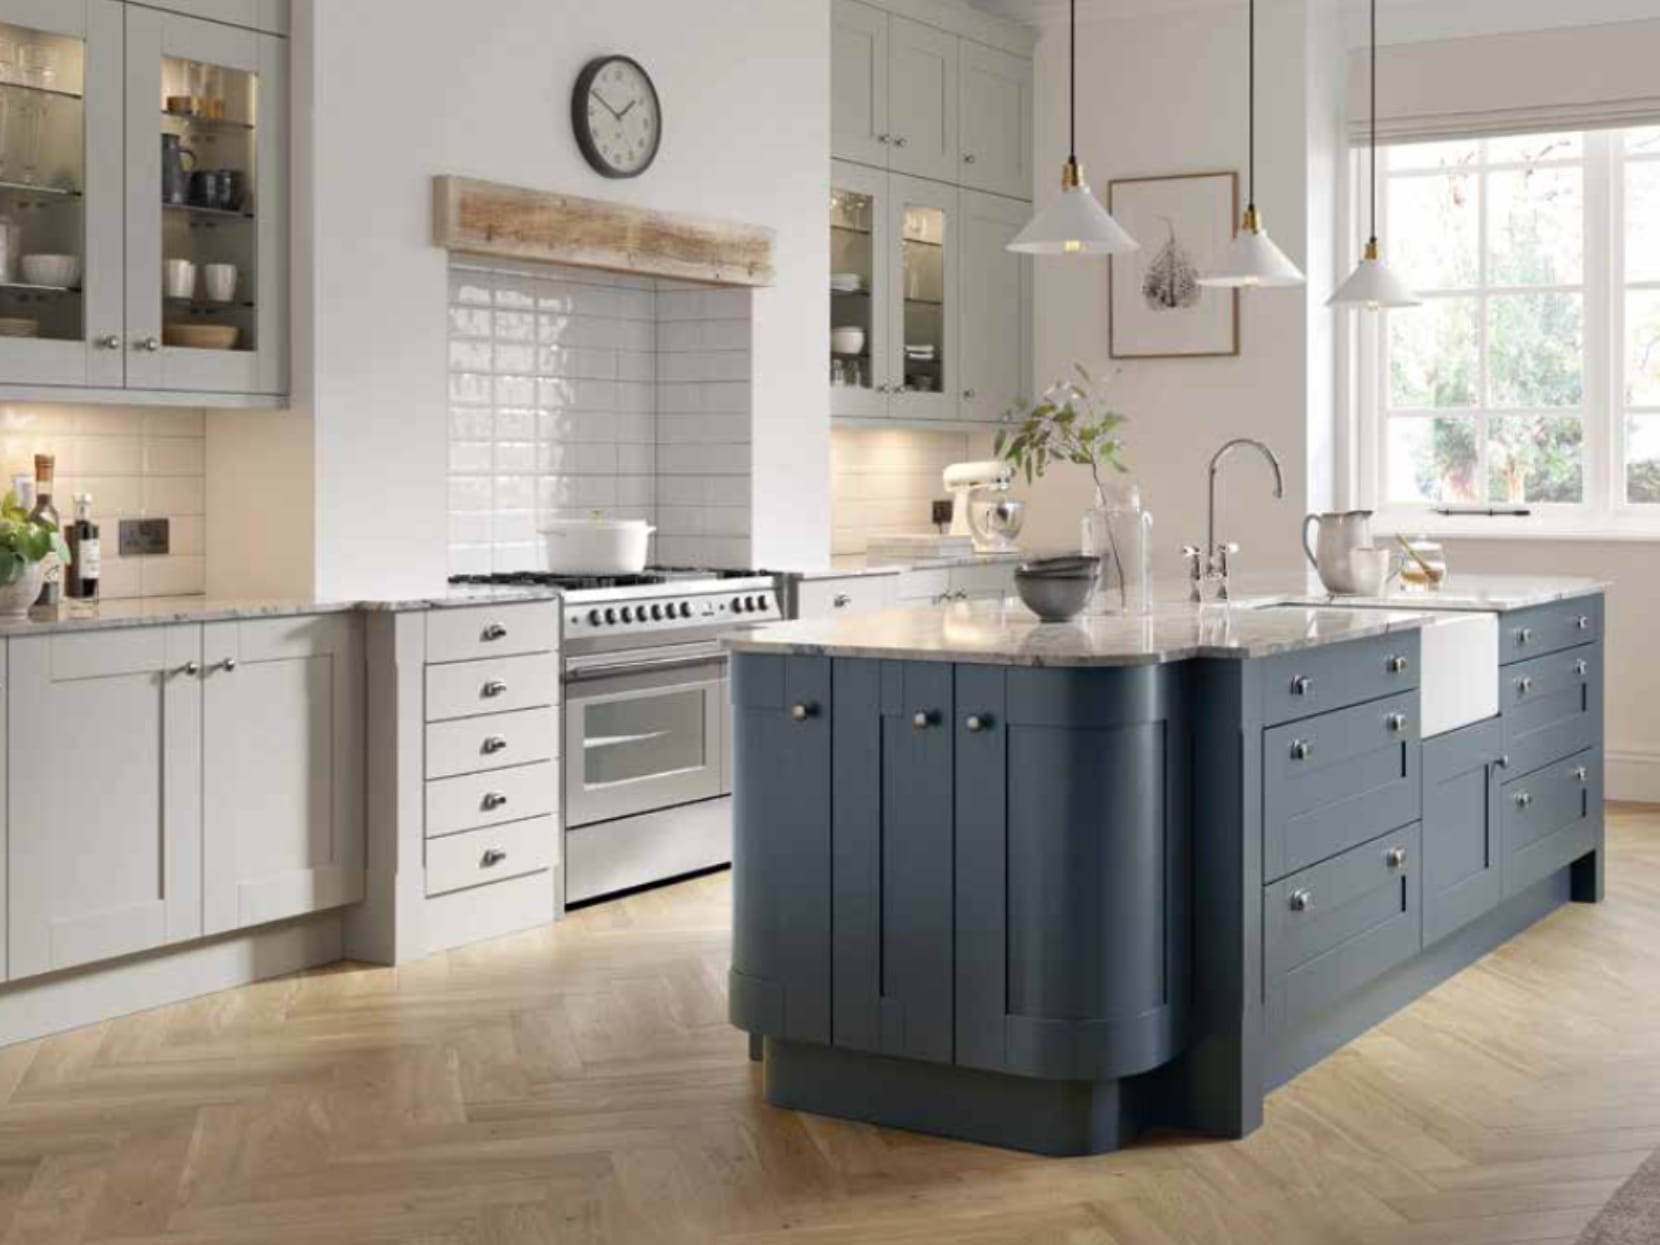 Painted Wood Shaker - Oxford Blue & Light Grey